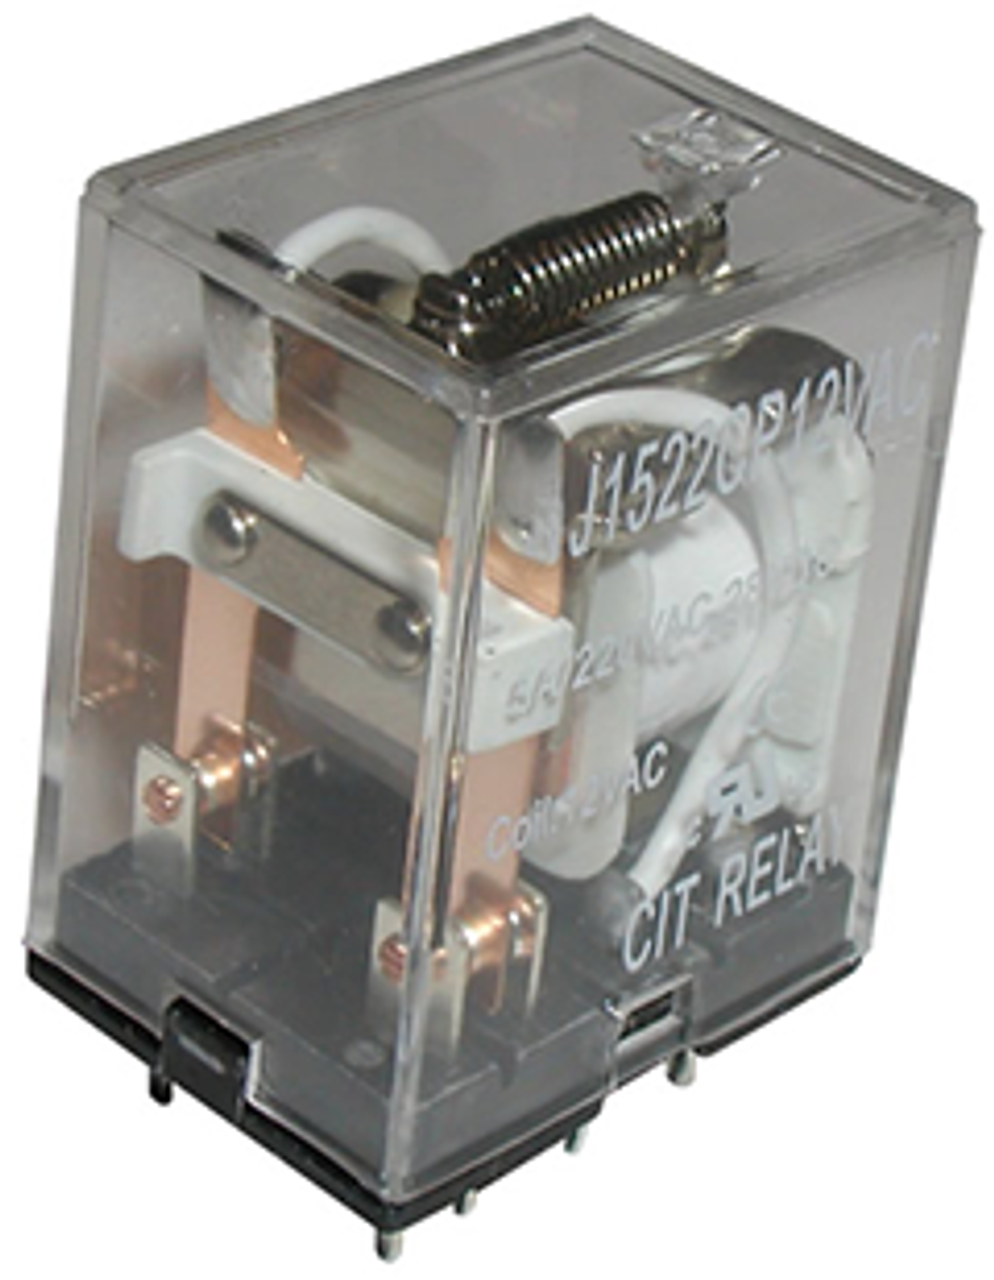 CIT Relay and Switch J1524CP110VDC Industrial Relays